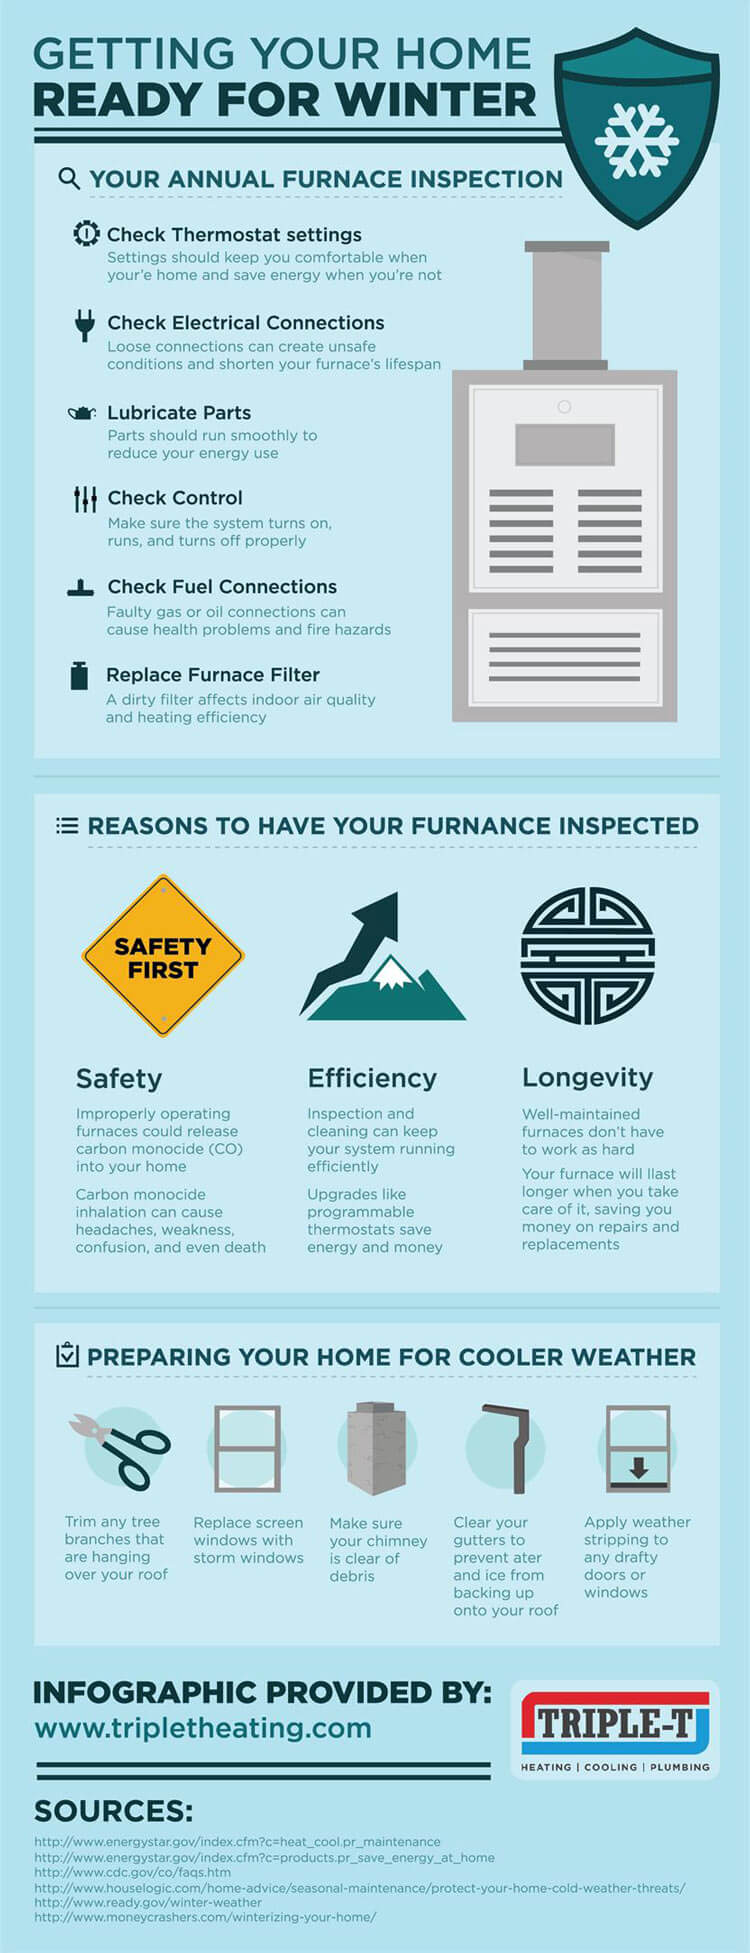 Reason to have your furnance inspected